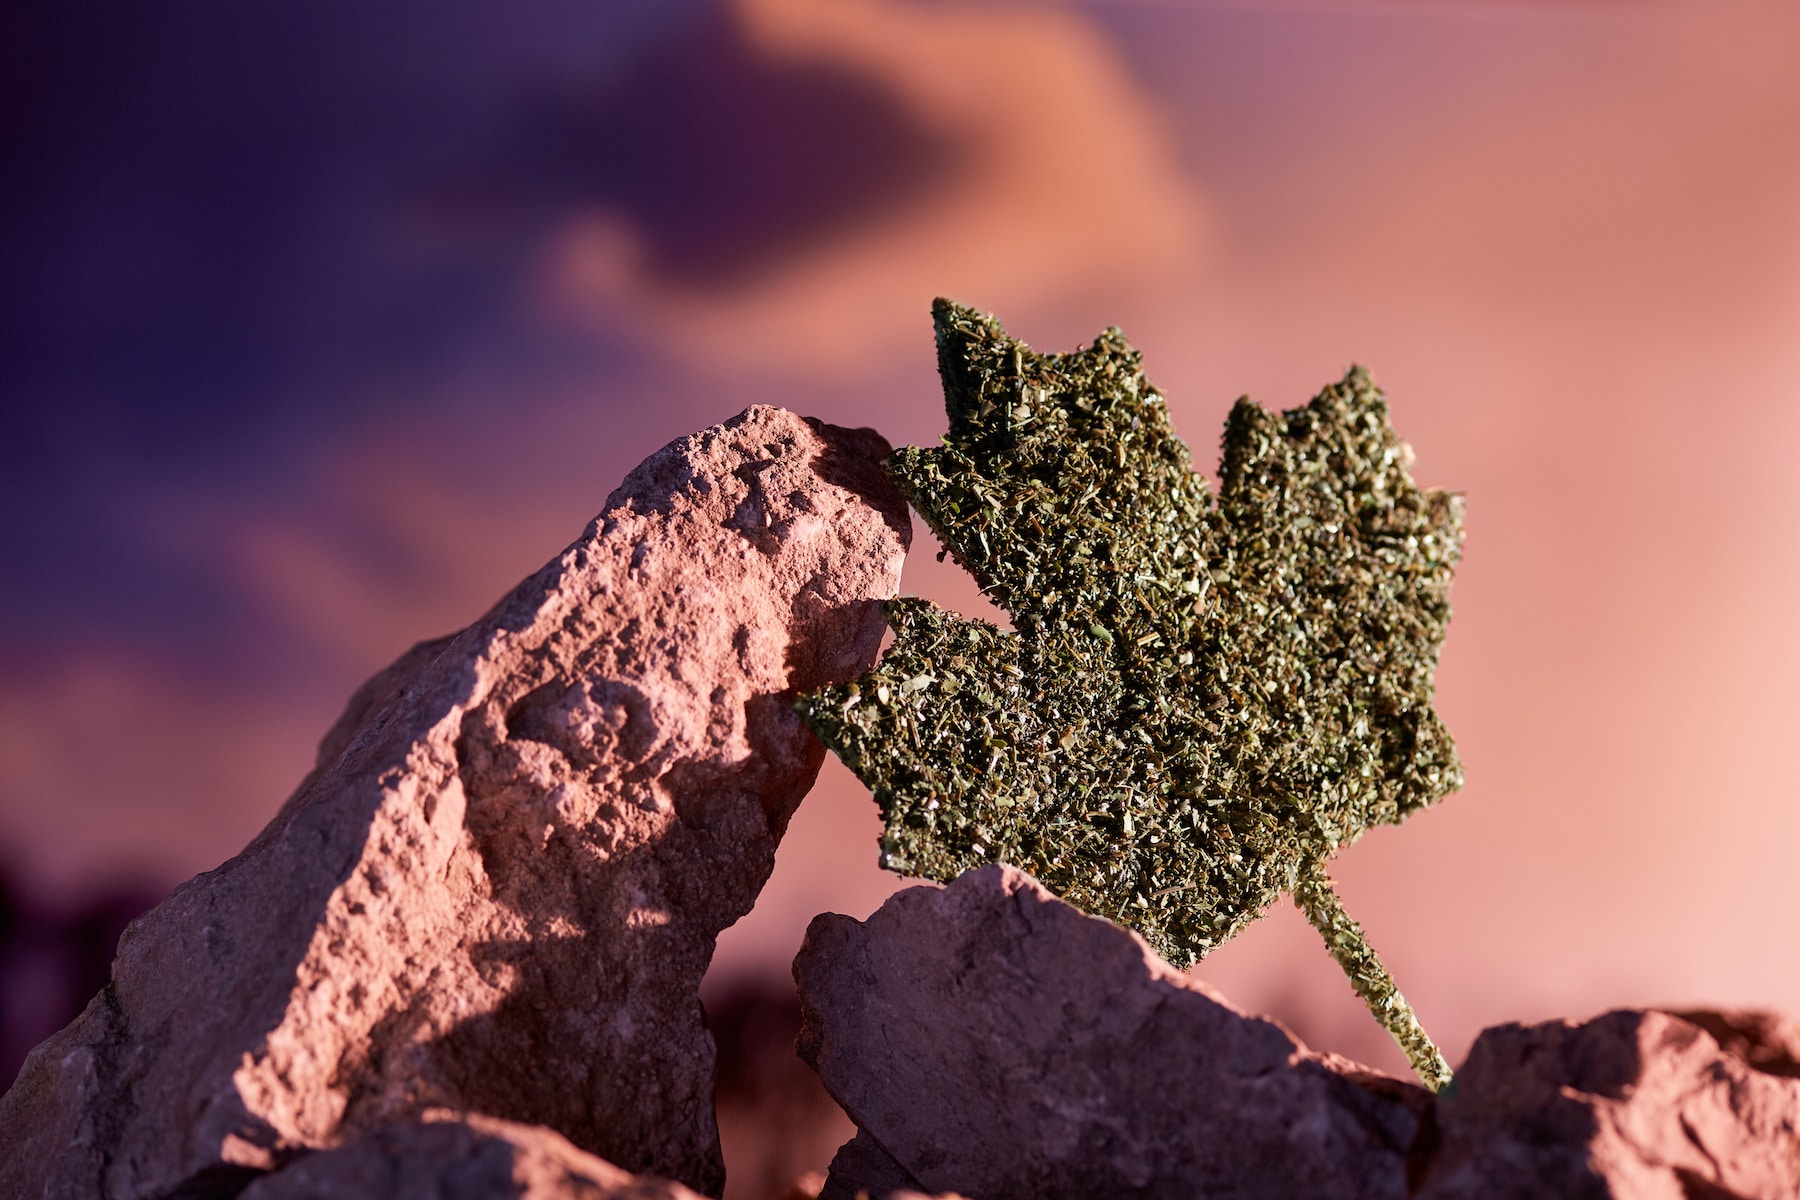 Recreational cannabis legalization in Canada. A huge maple leaf made from dry weed, leant against the rock. The Canadian emblem incorporated into the mountain landscape, over the sunset background.